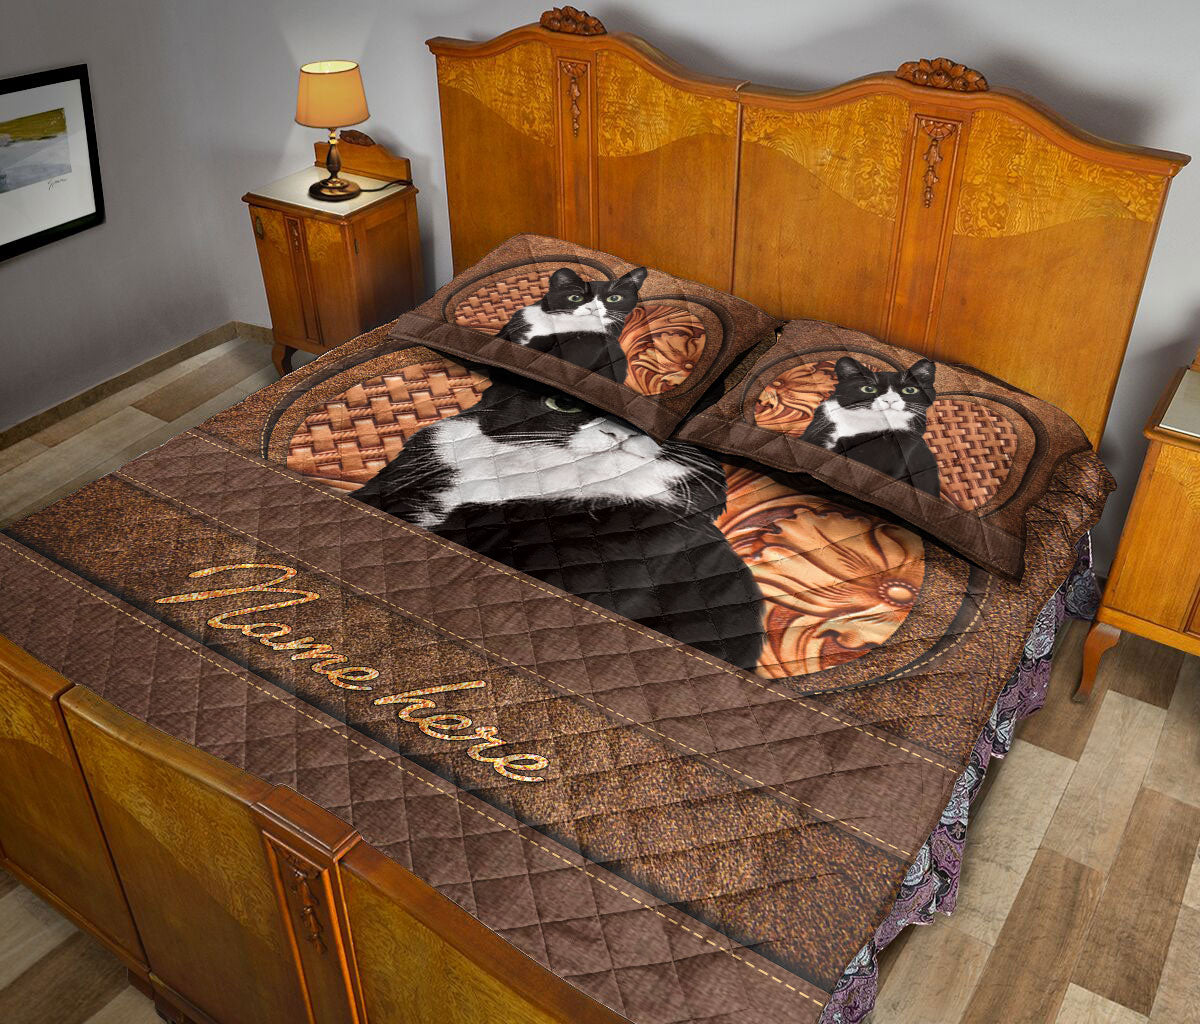 Ohaprints-Quilt-Bed-Set-Pillowcase-Tuxedo-Cat-Bicolor-Cat-Animal-Pet-Lover-Vintage-Brown-Custom-Personalized-Name-Blanket-Bedspread-Bedding-218-Queen (80'' x 90'')